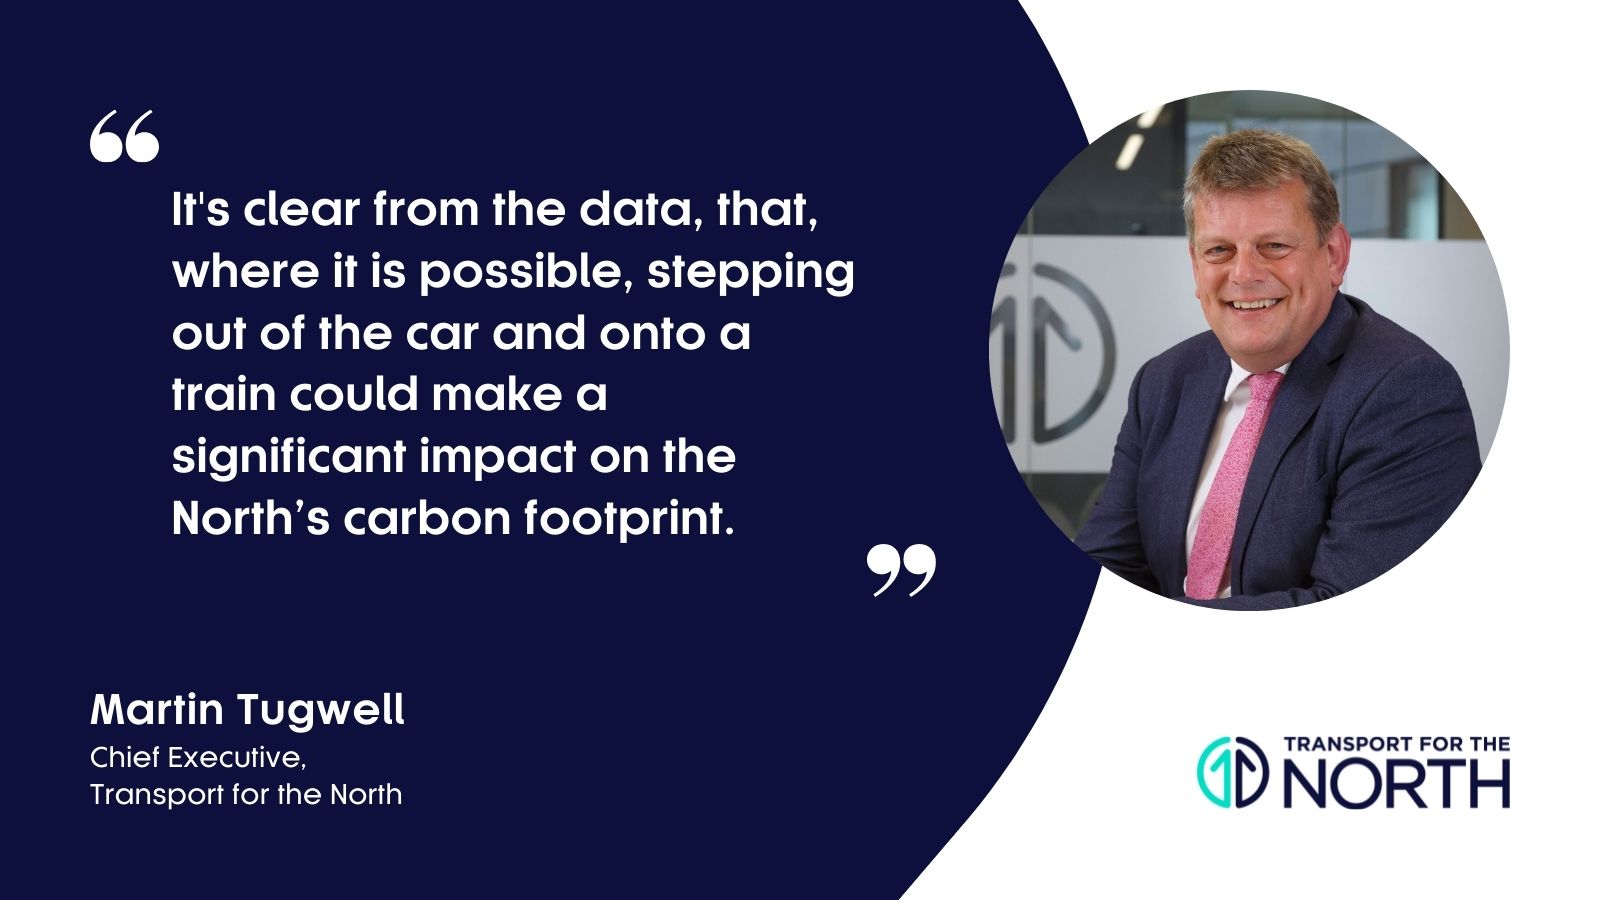 Martin Tugwell, Chief Executive of Transport for the North, on the environmental impact of our travel choices.